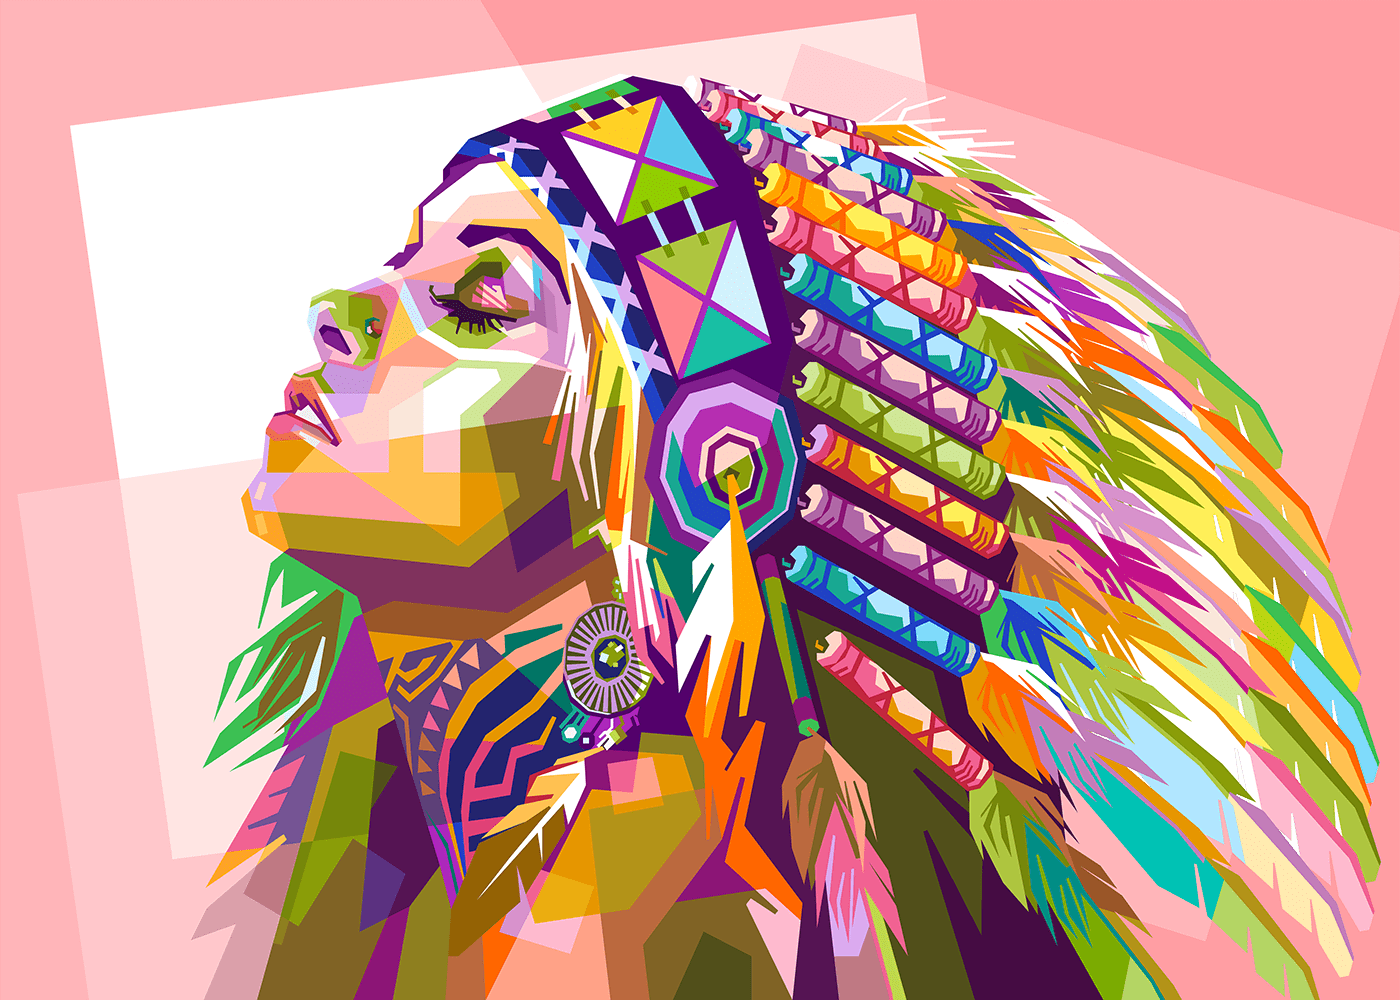 Apache Beautiful beauty color colorful cool cute design Drawing  fullcolor girl ILLUSTRATION  Pop Art WPAP best famous fantastic favorite great ladies Lady Like Love lovely pink portrait woman